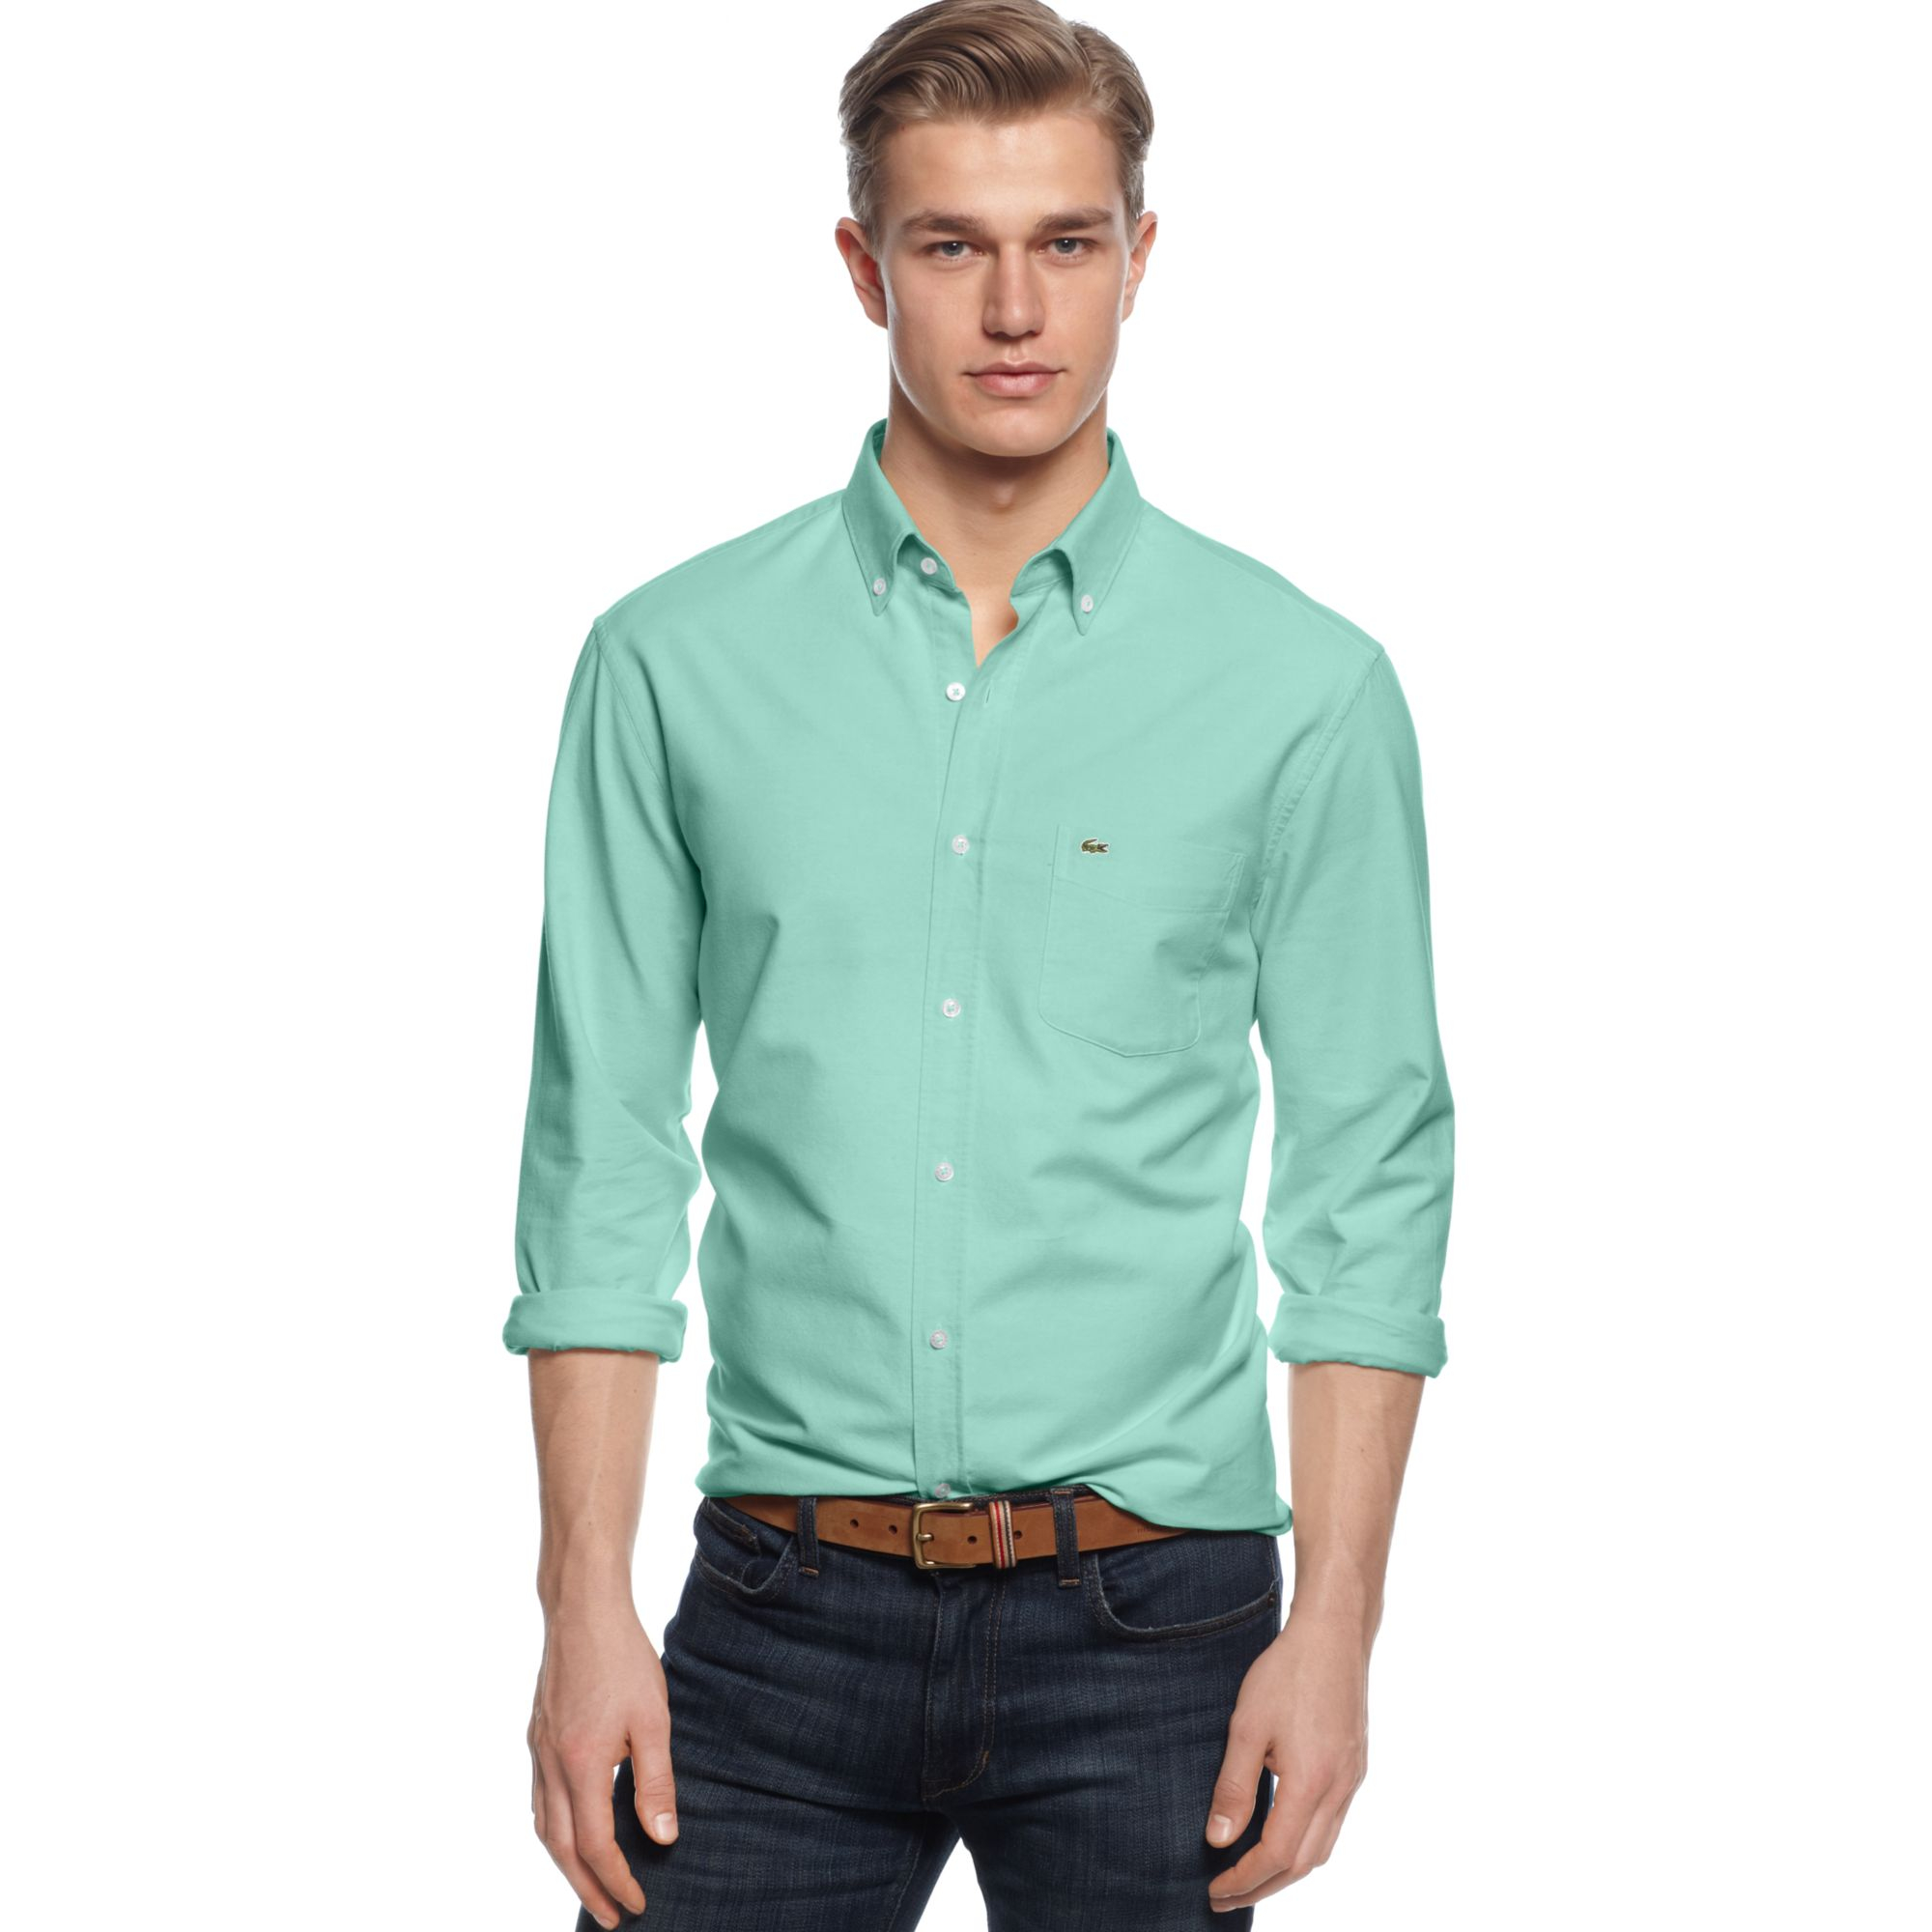 Download Lyst - Lacoste Long Sleeve Button Down Oxford Shirt in ...